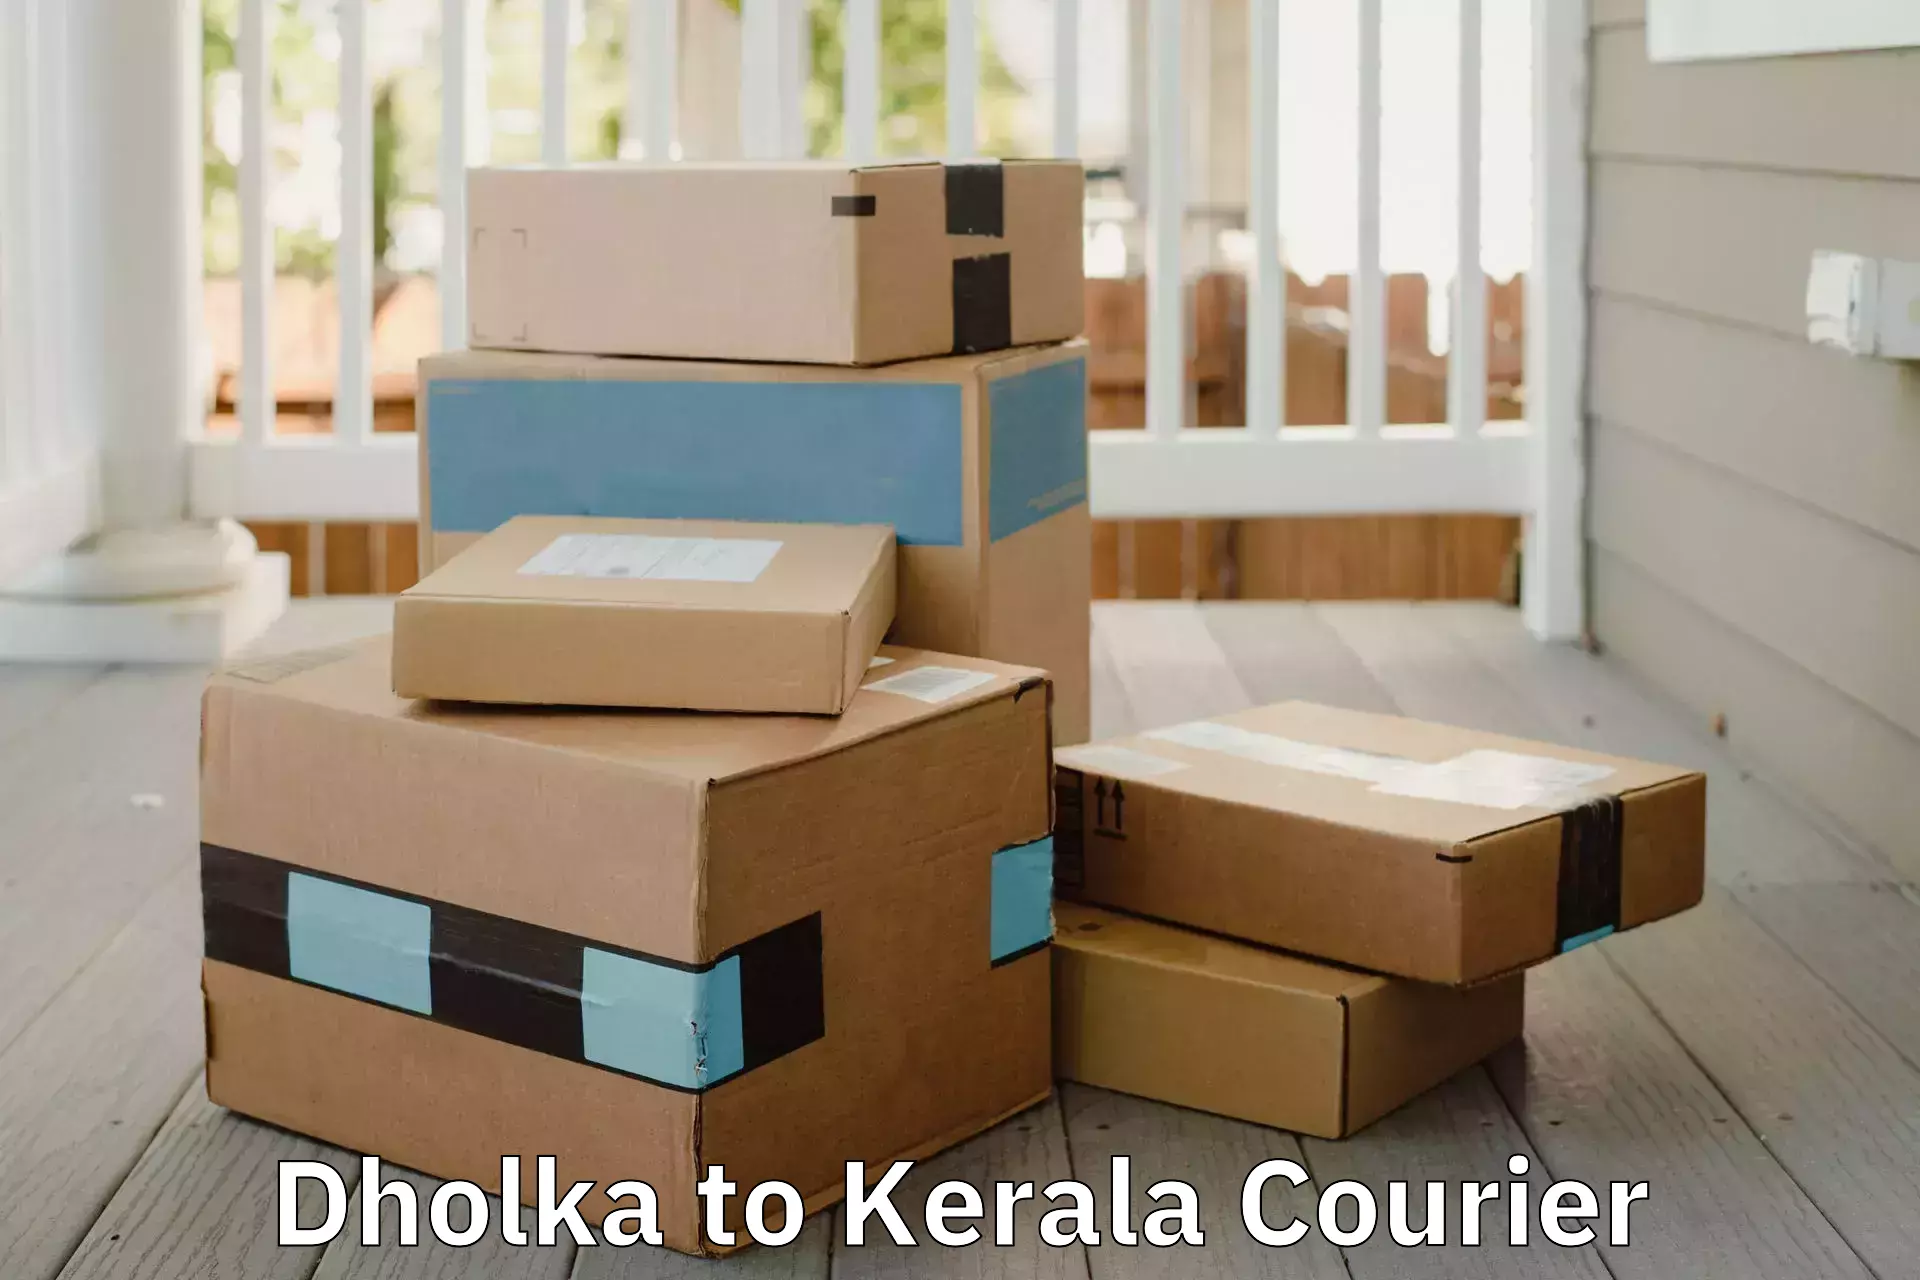 Home relocation experts Dholka to Kerala